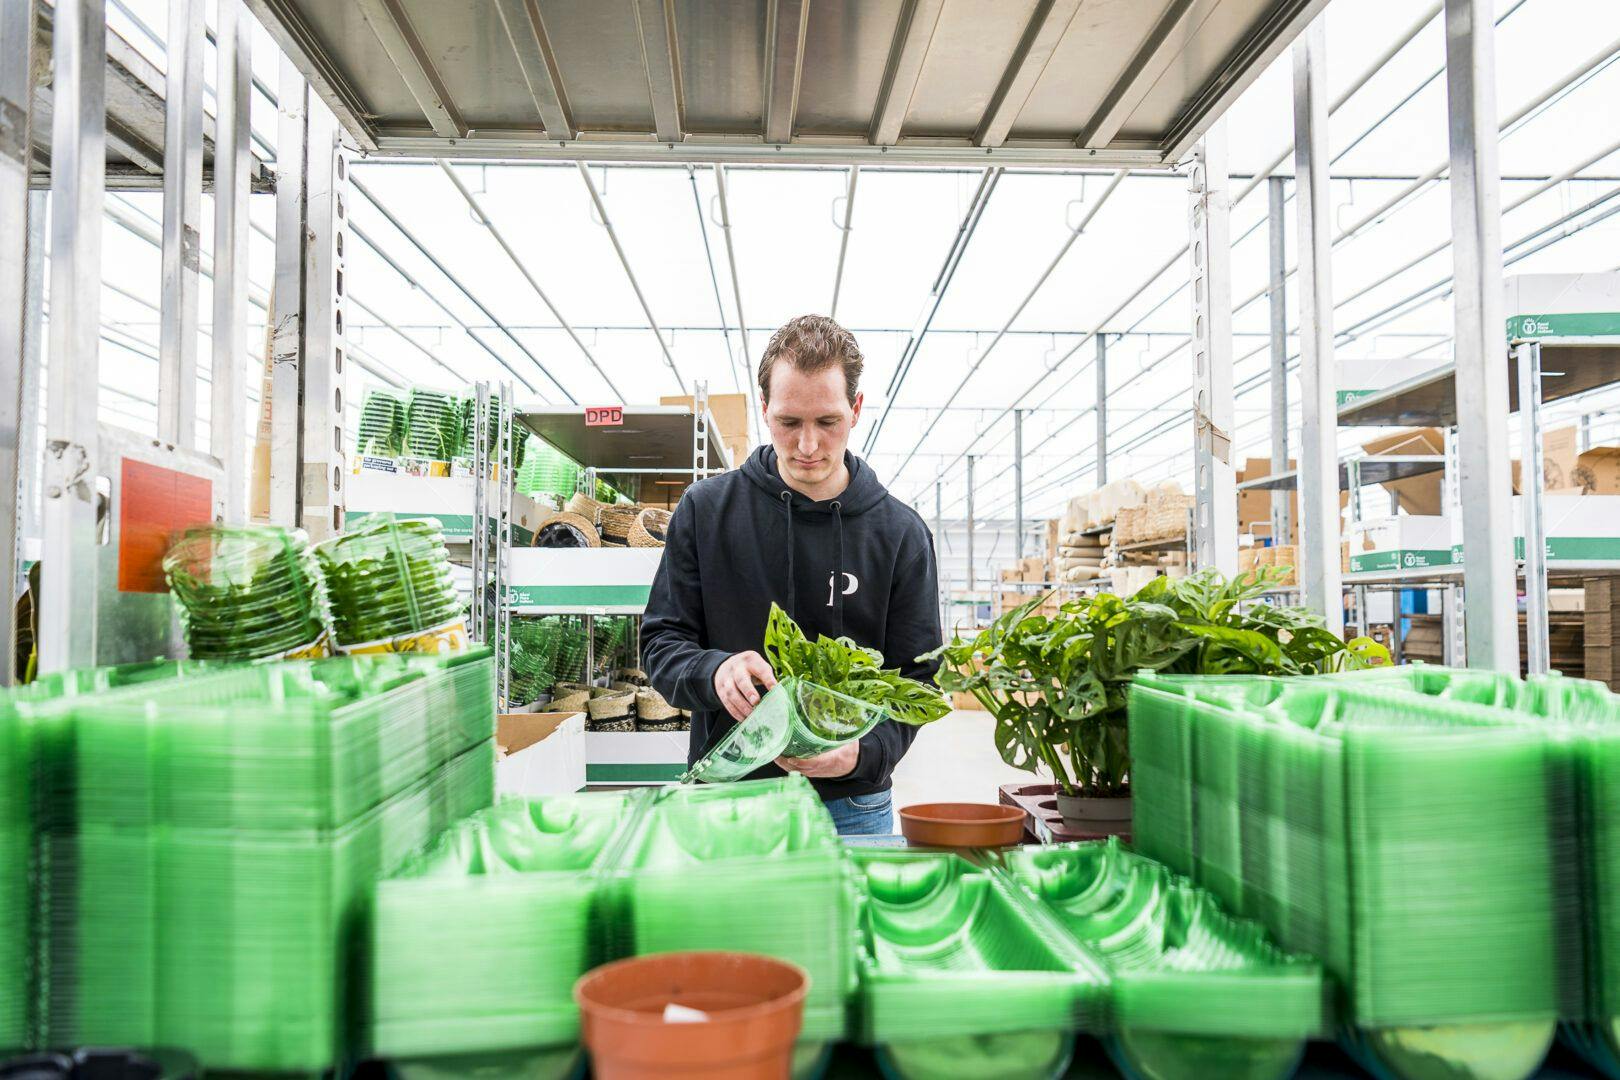 Packing plants